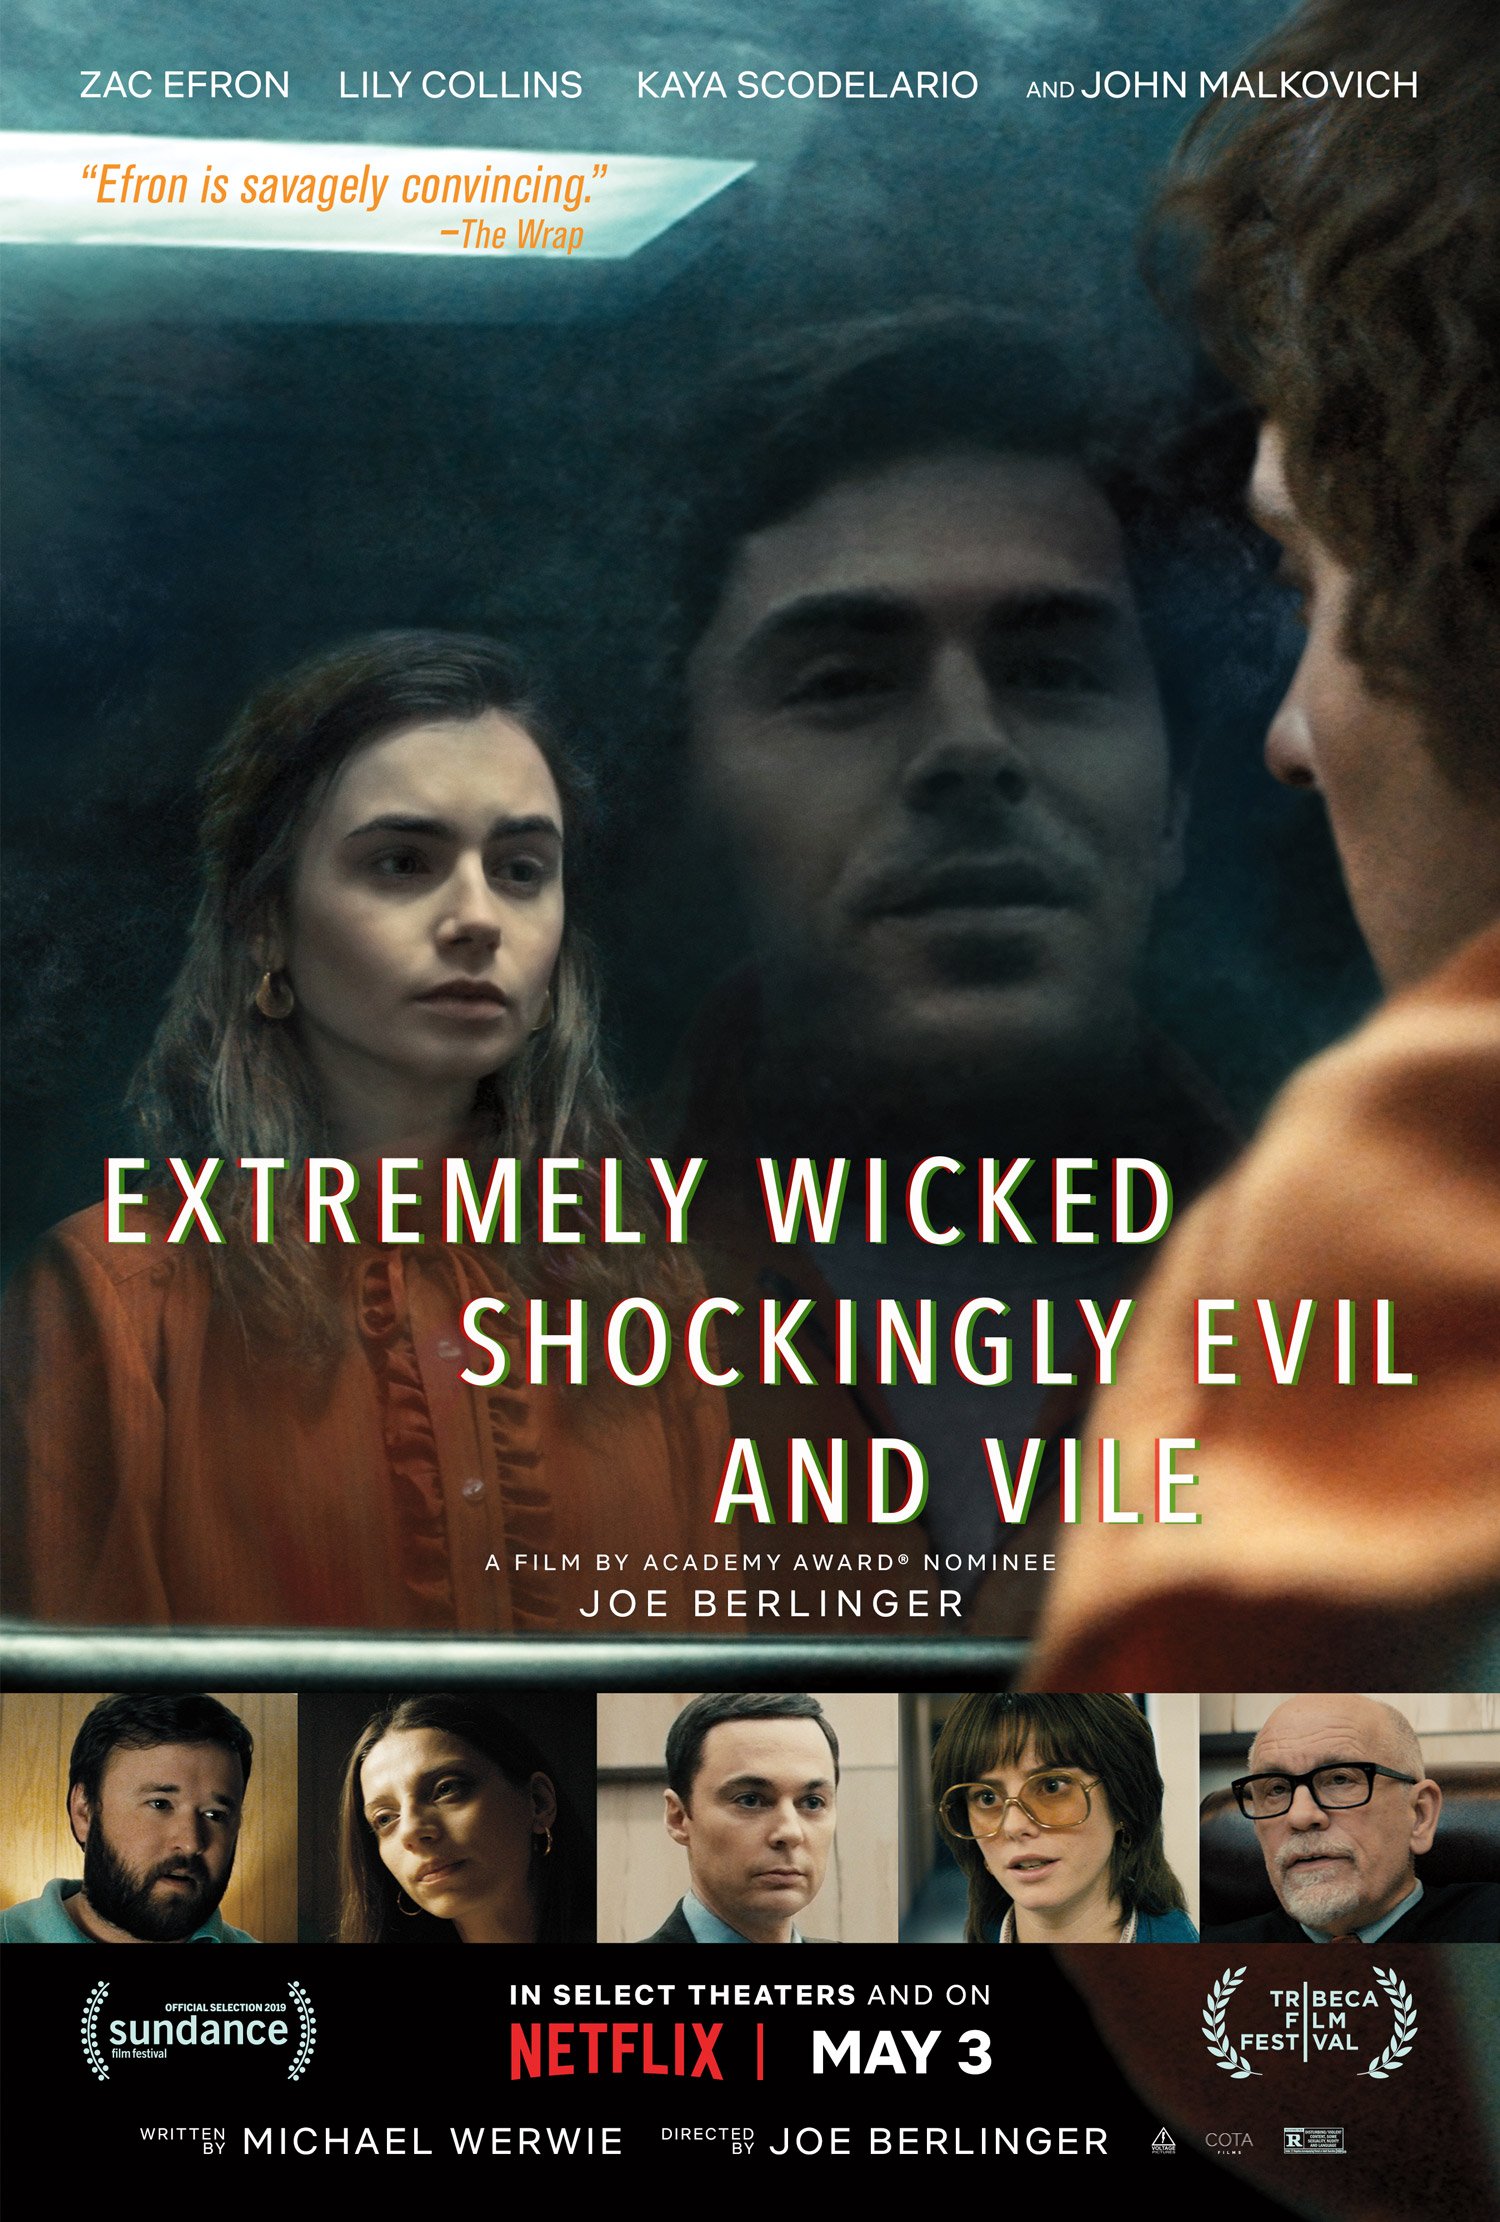 Extremely Wicked, Shockingly Evil and vile (2019) - Score Mixer &amp; Engineer